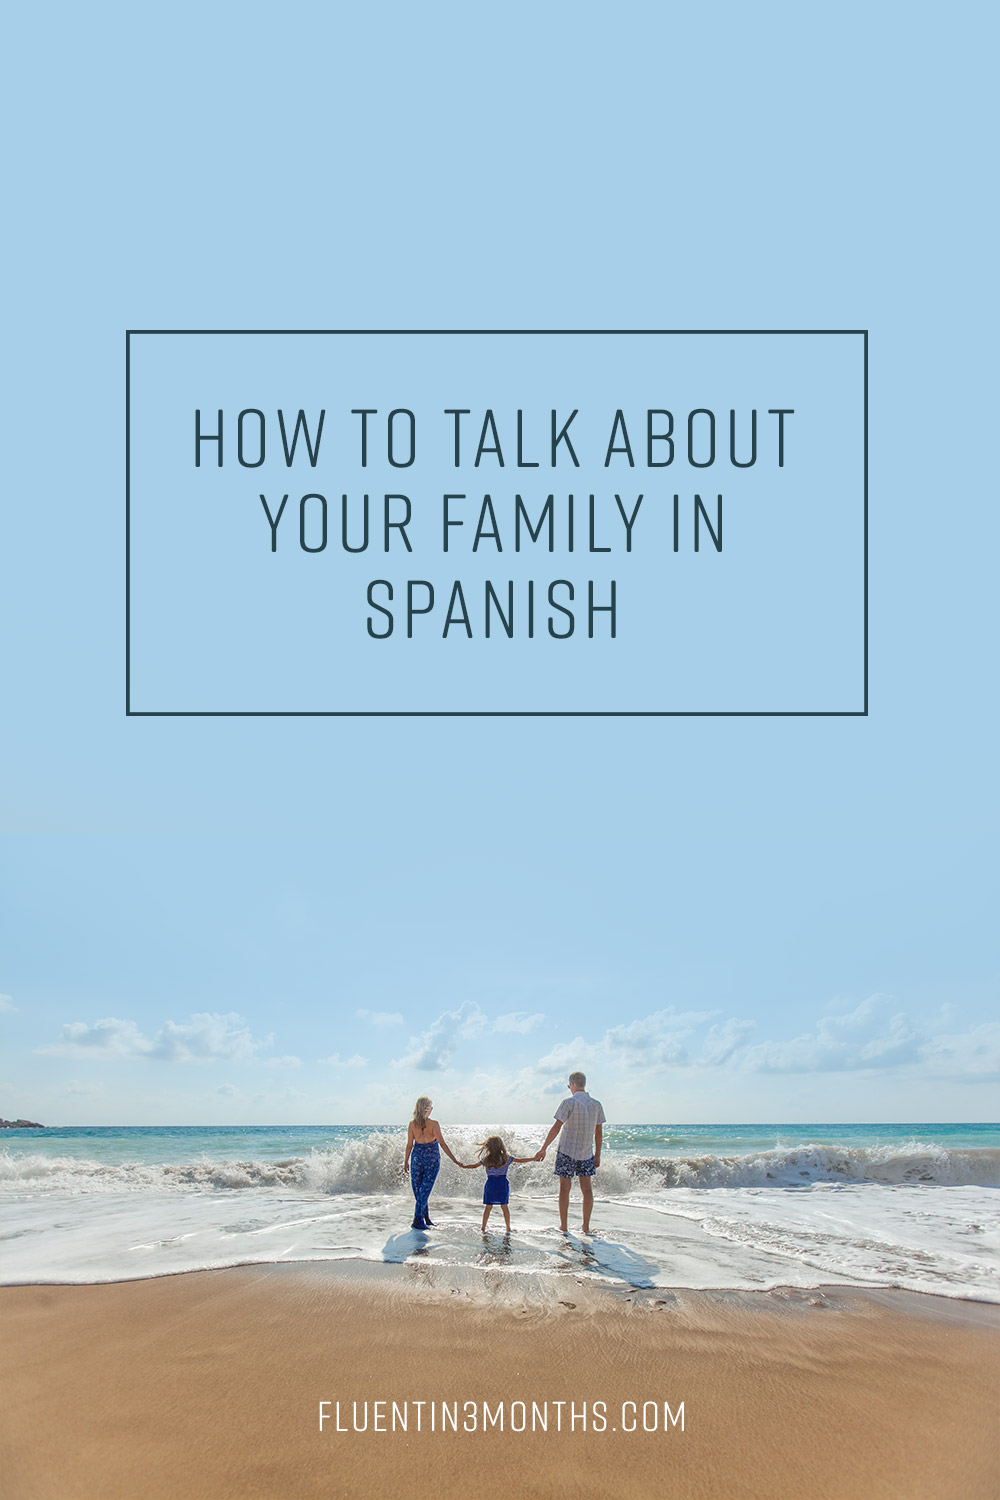 to visit my family in spanish